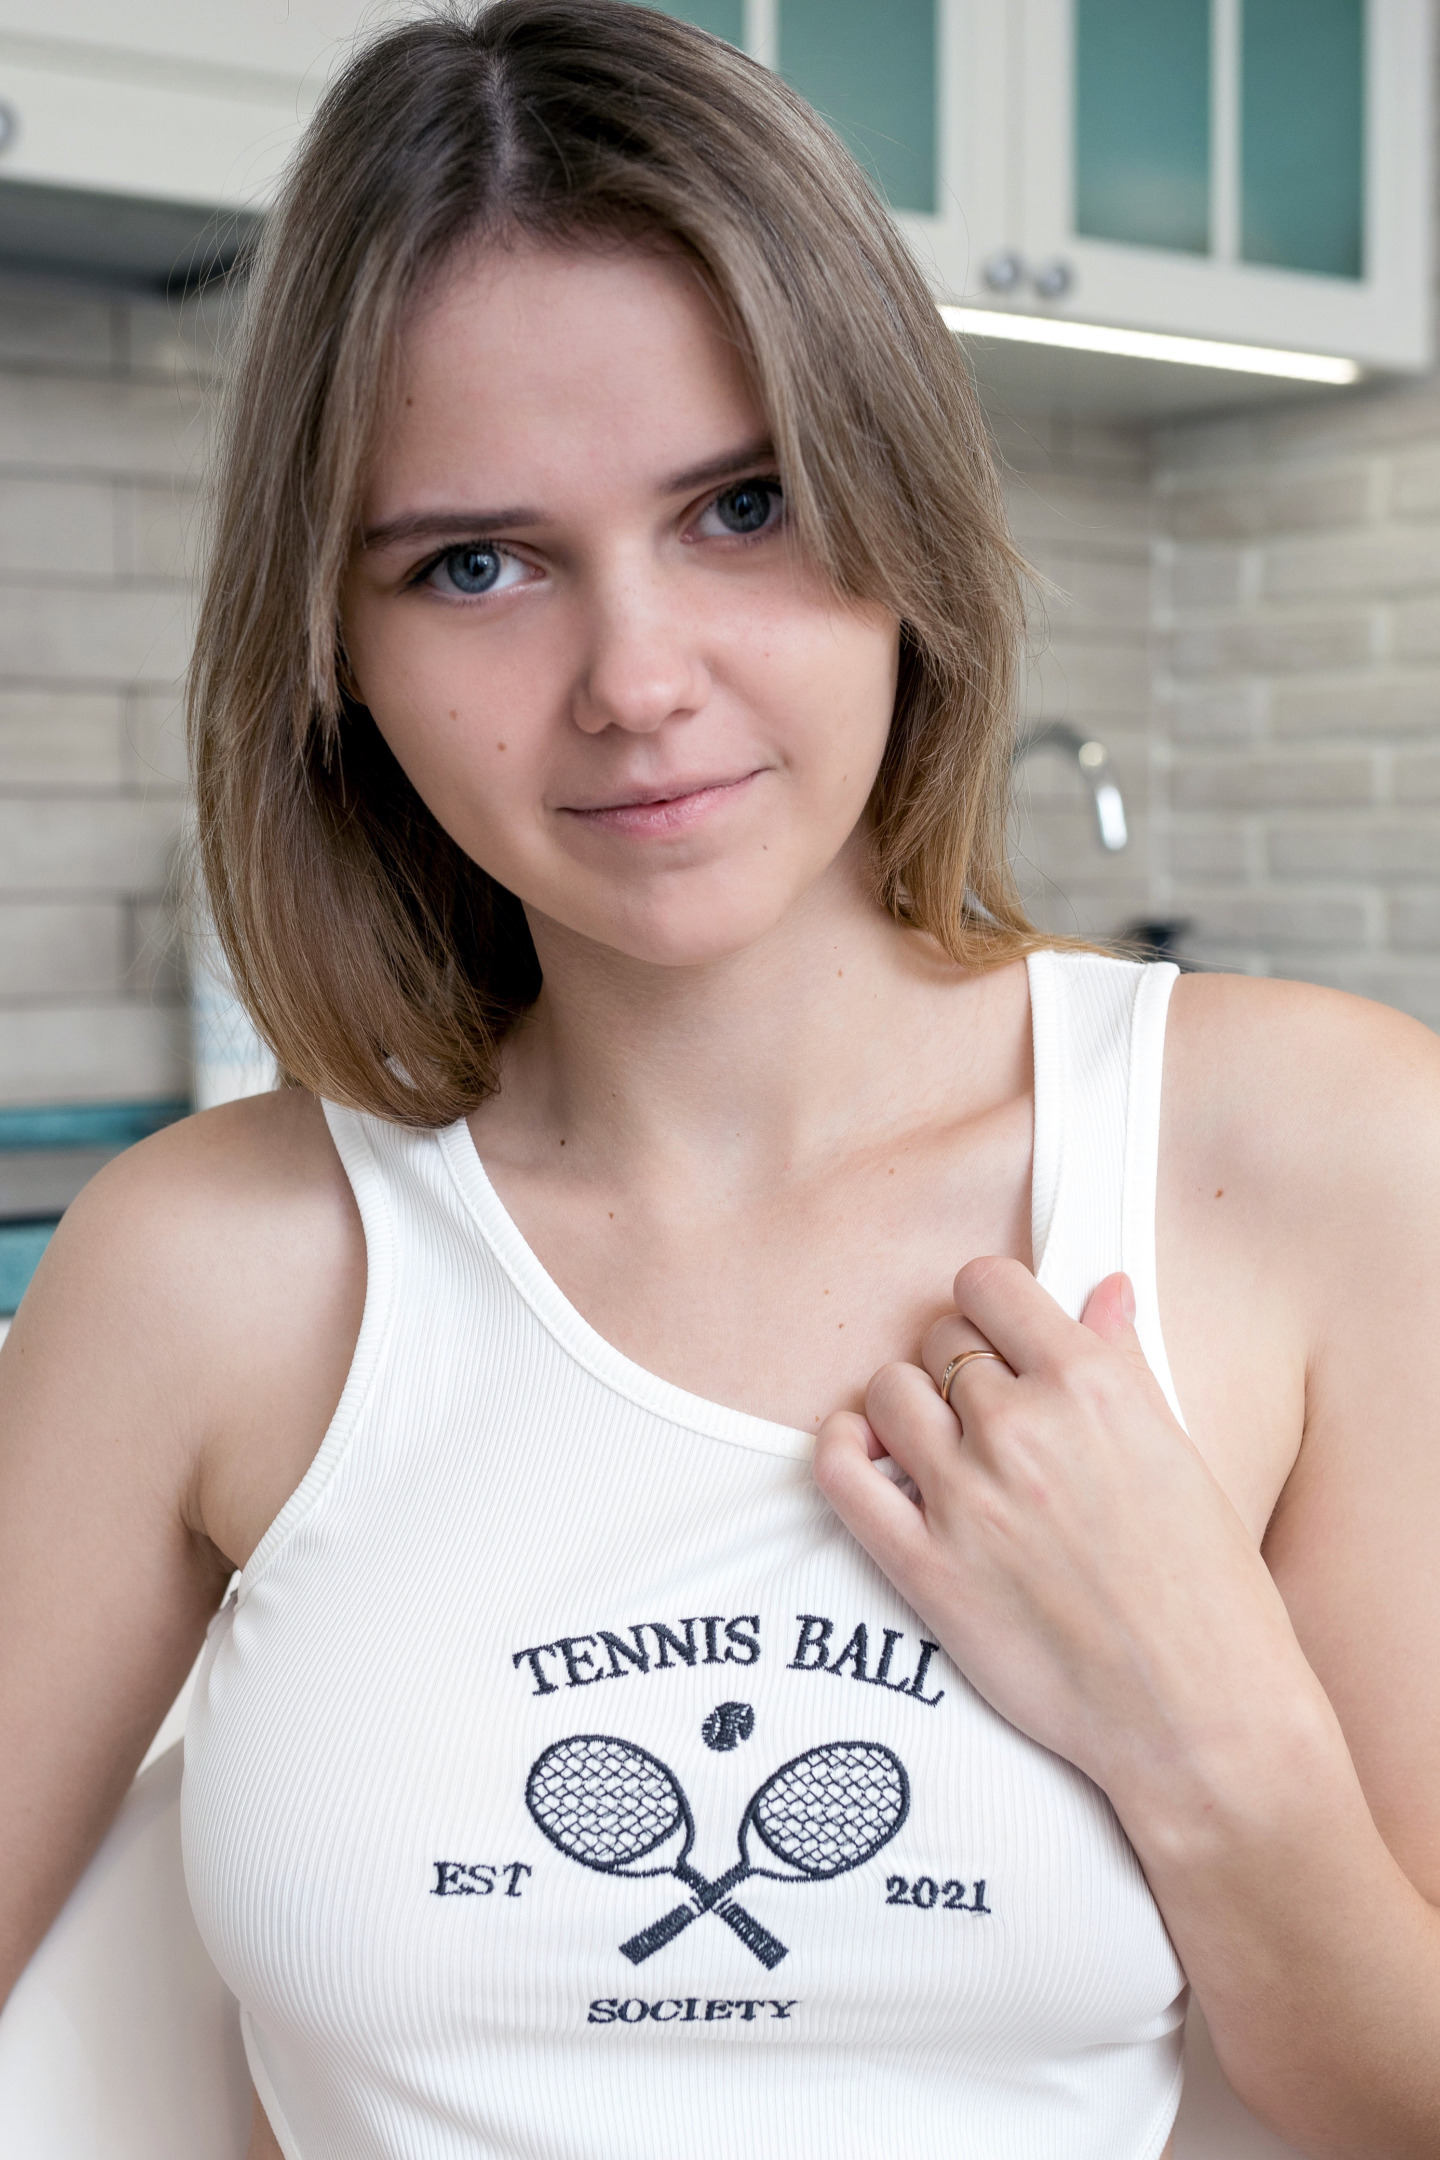 Indoor Shoot Of Sexy Brunette Girl With Sleeveless T-shirt And